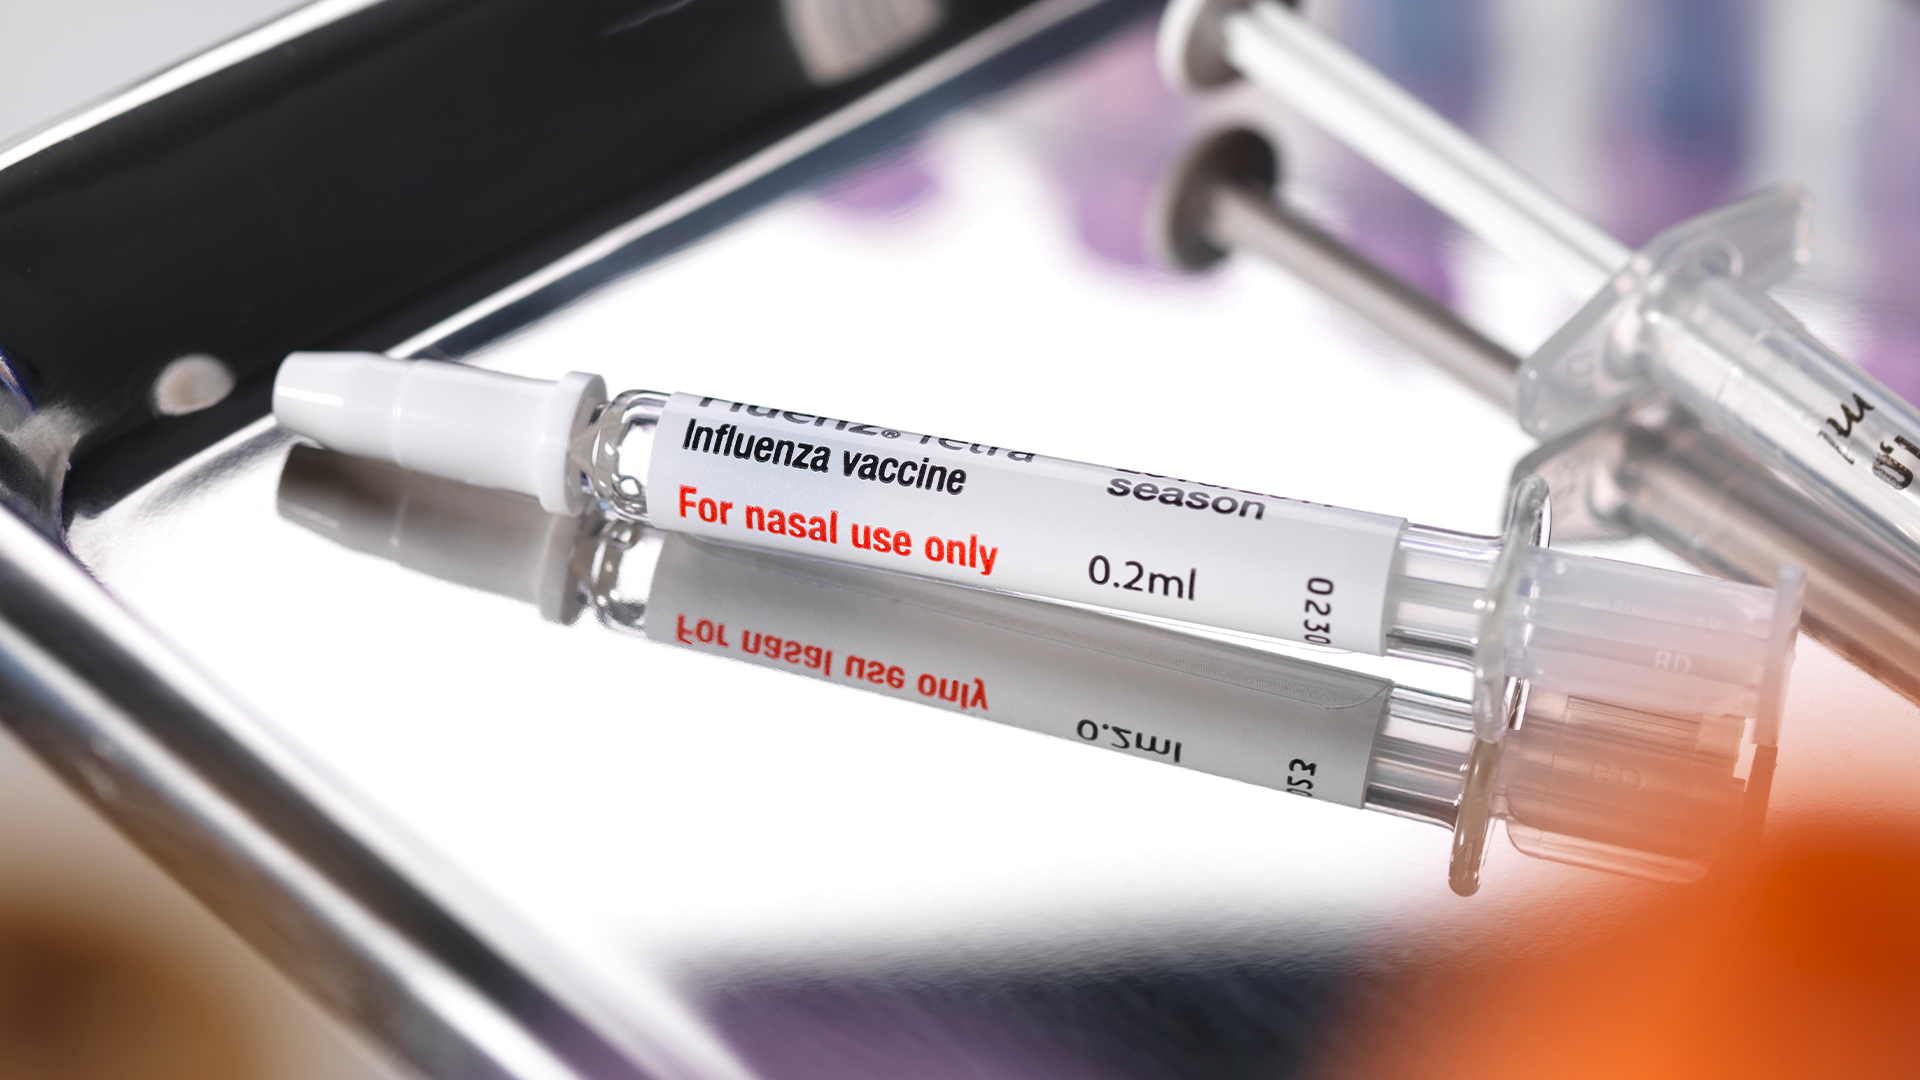 Sealed nasal influenza vaccine laying on a silver medical tray